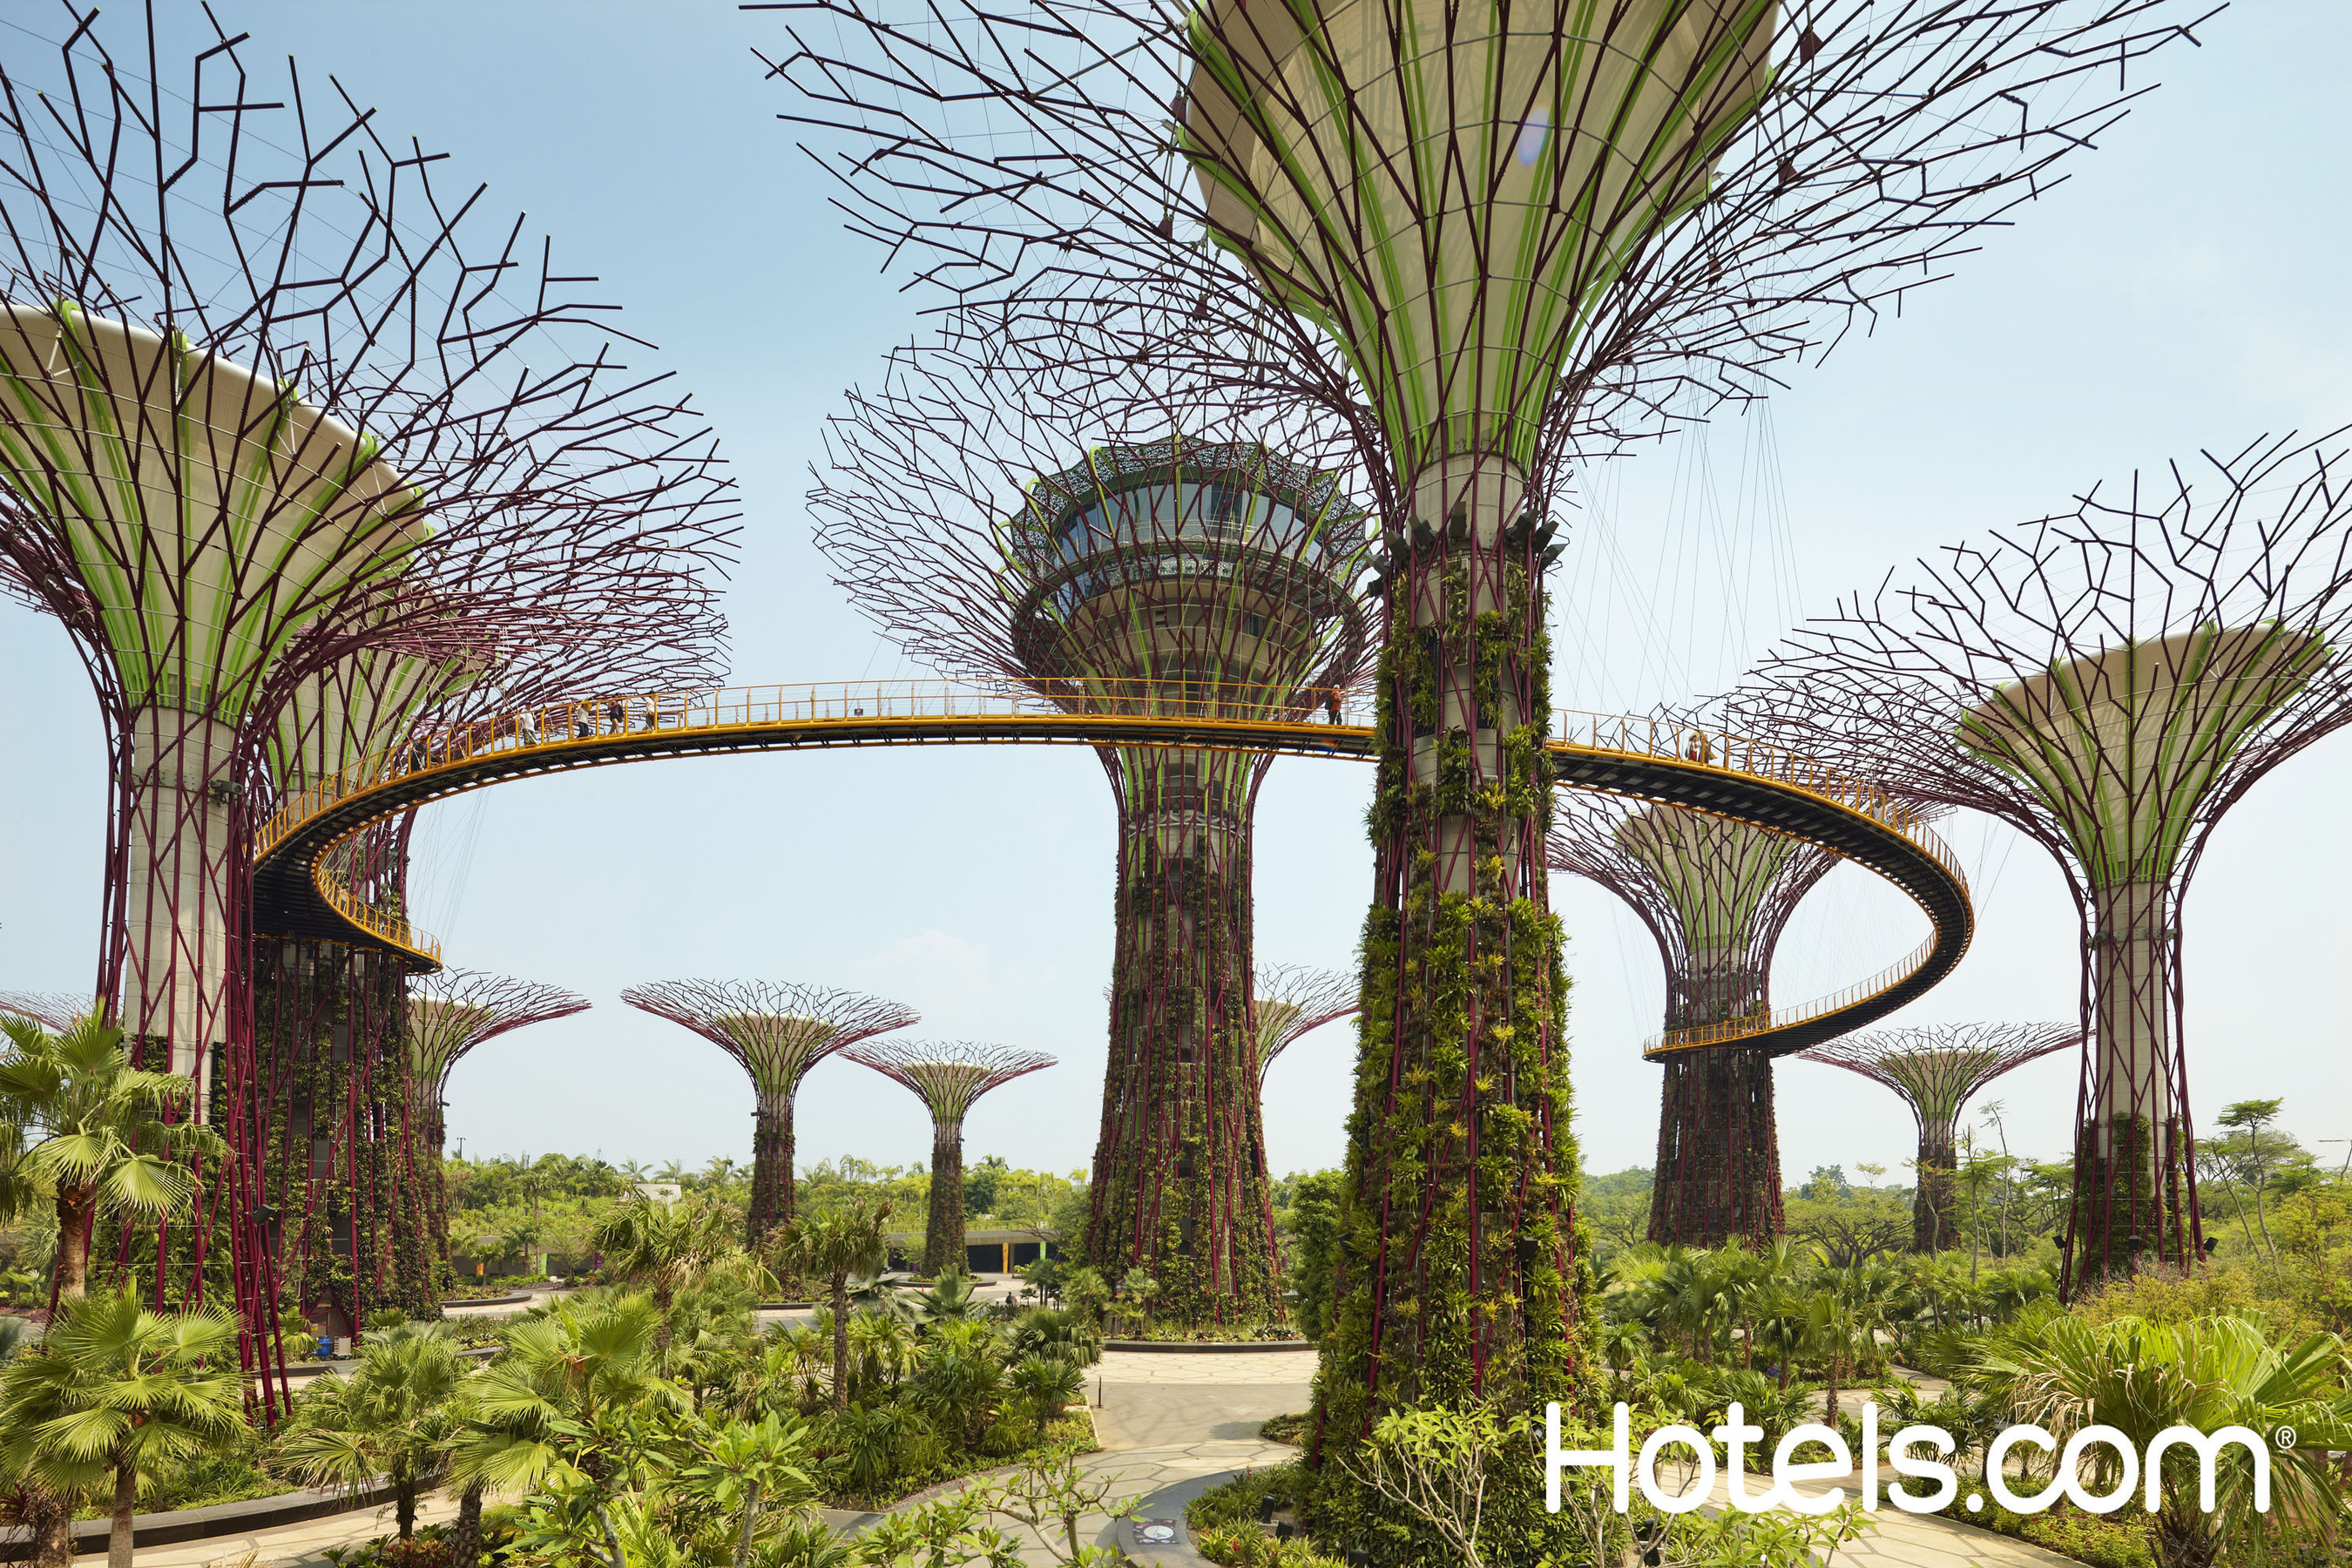 The travel experts at Hotels.com(R) have identified some of the top "green hotels" in cities like Singapore. (PRNewsFoto/Hotels.com)